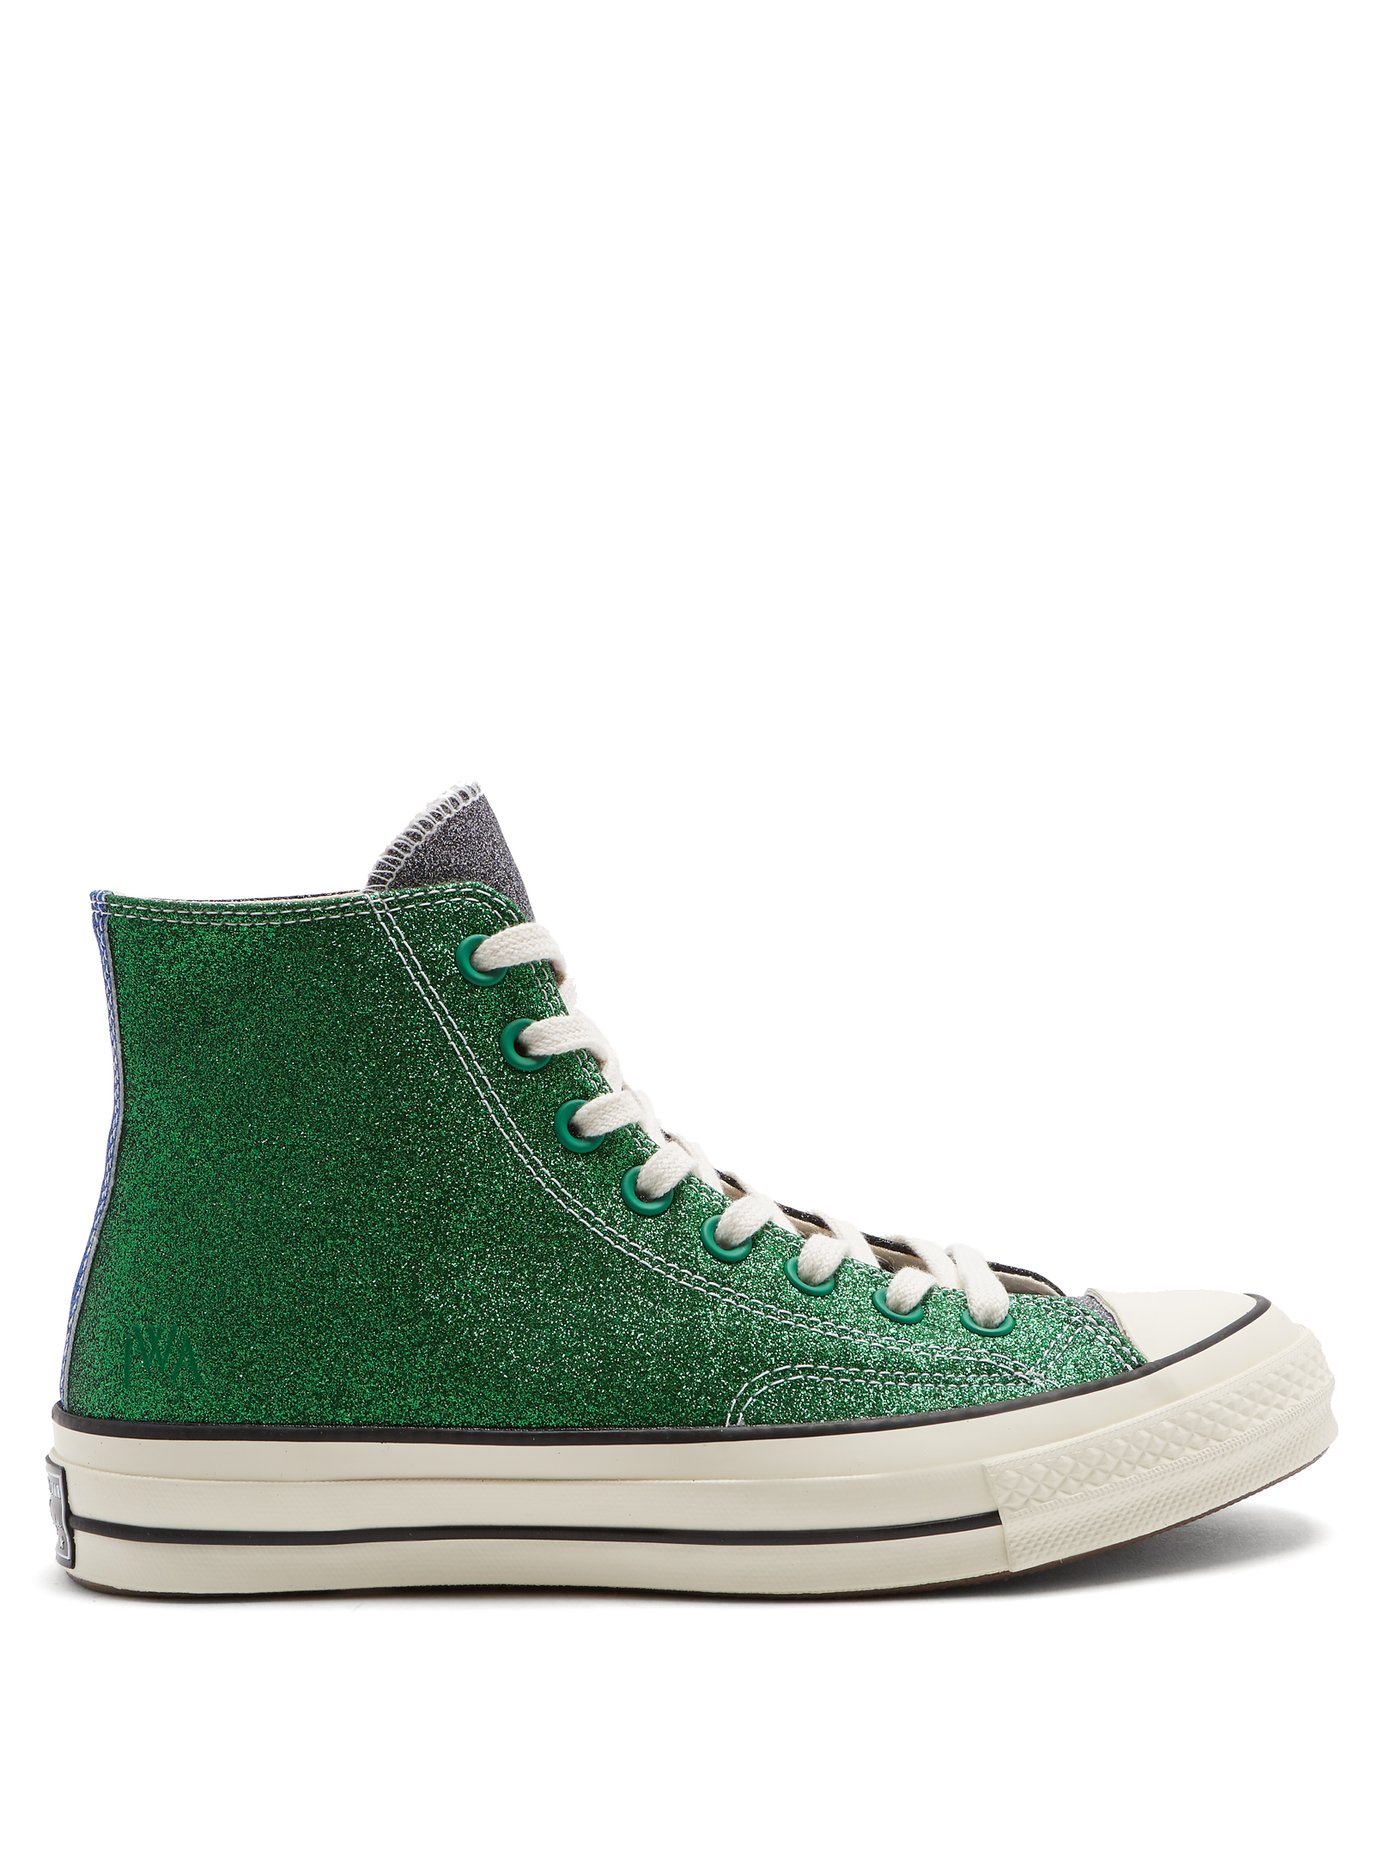 Glitter high-top trainers | Converse x JW Anderson | MATCHESFASHION UK